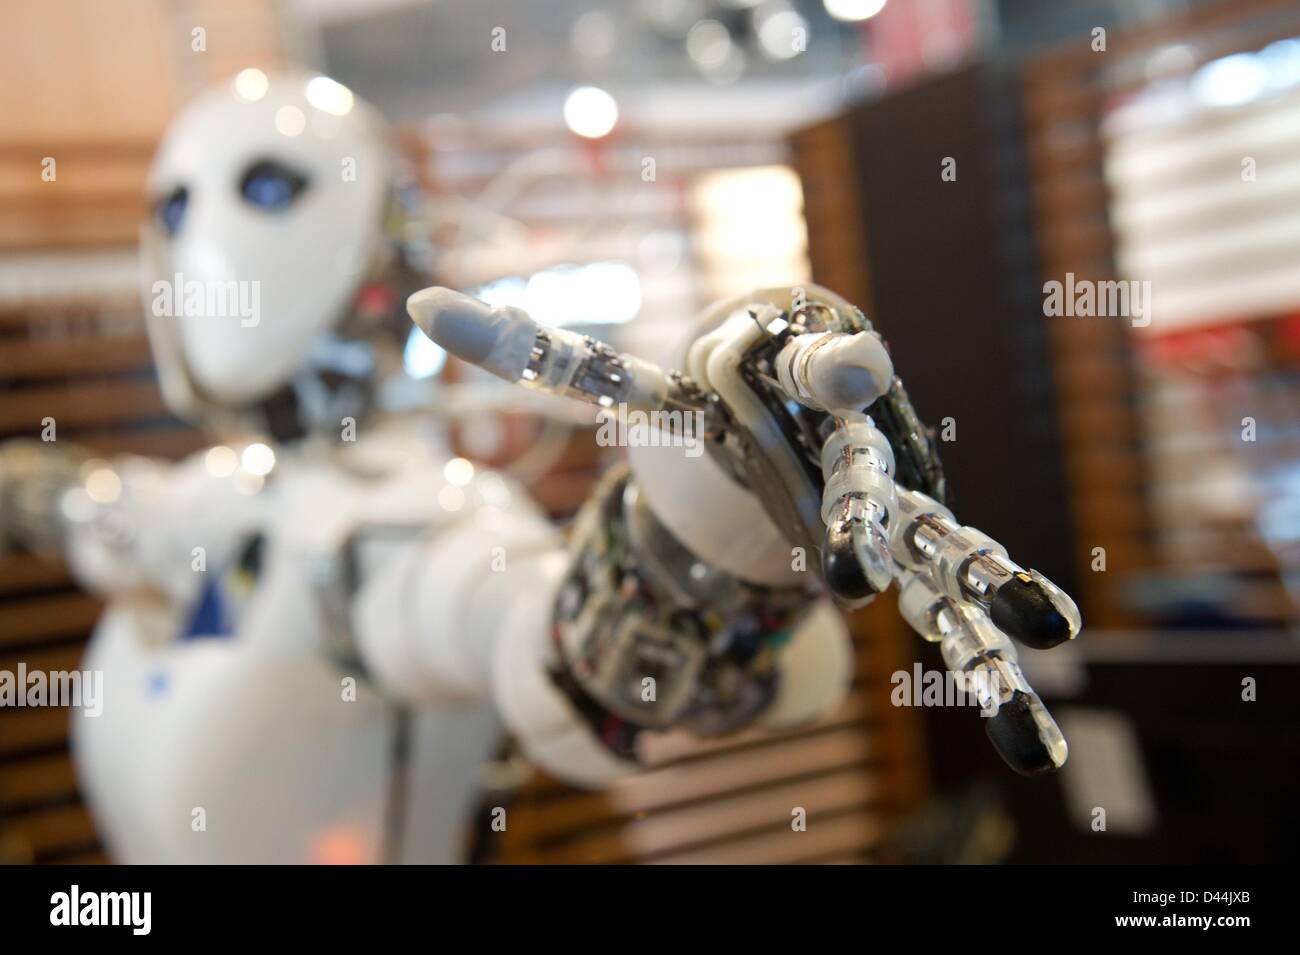 Robot AILA stands with outstretched fingers at CeBIT, the world's largest computer expo, in Hanover, Germany, 04 March 2013. Photo: SEBASTIAN KAHNERT Stock Photo